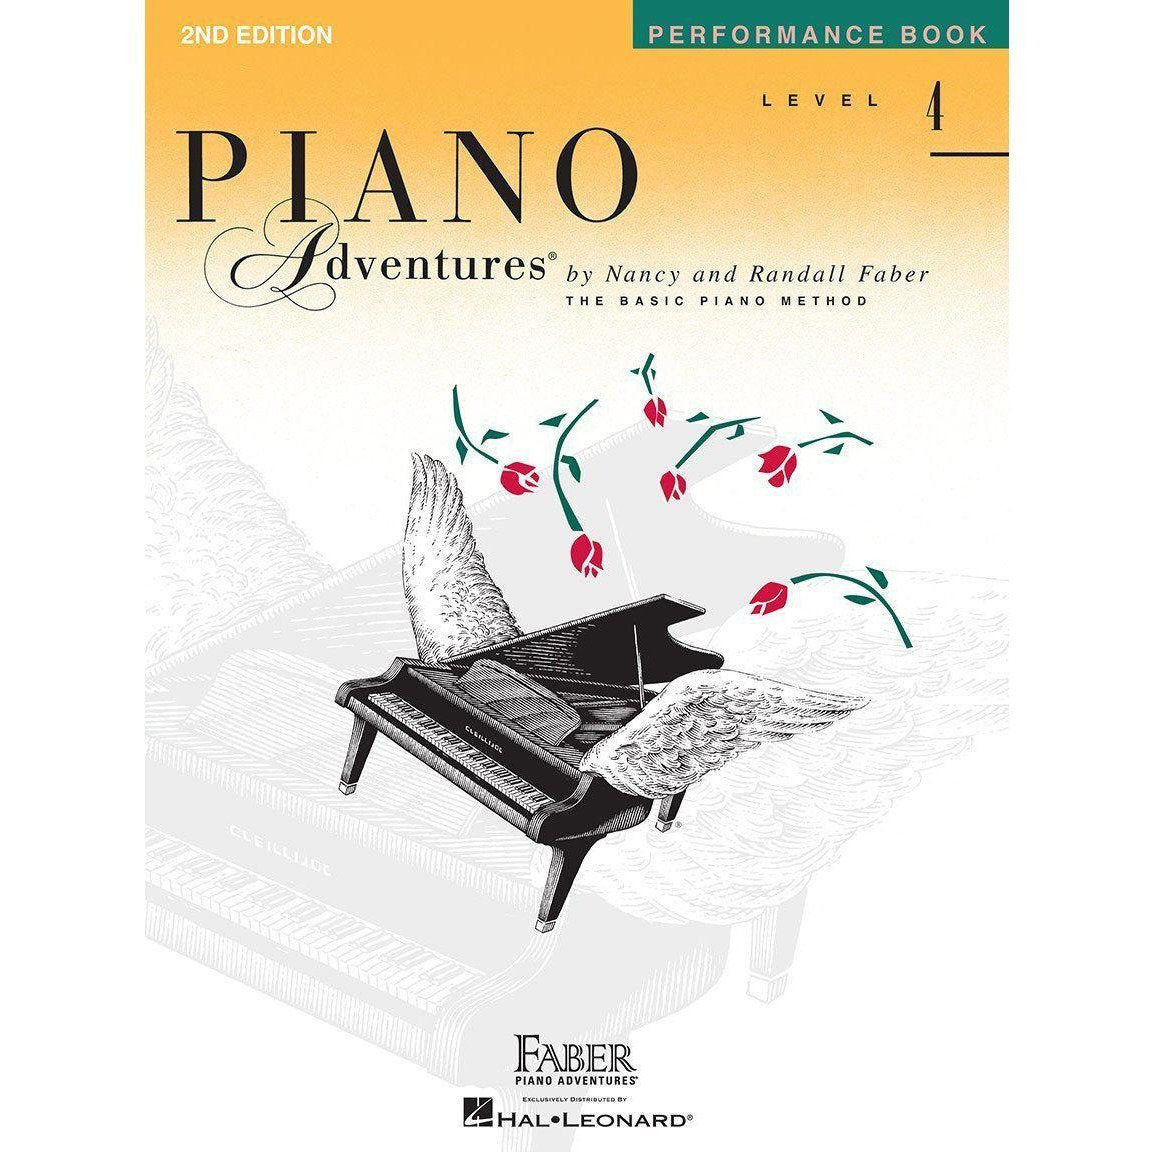 Faber Piano Adventures-4-Performance-Andy's Music